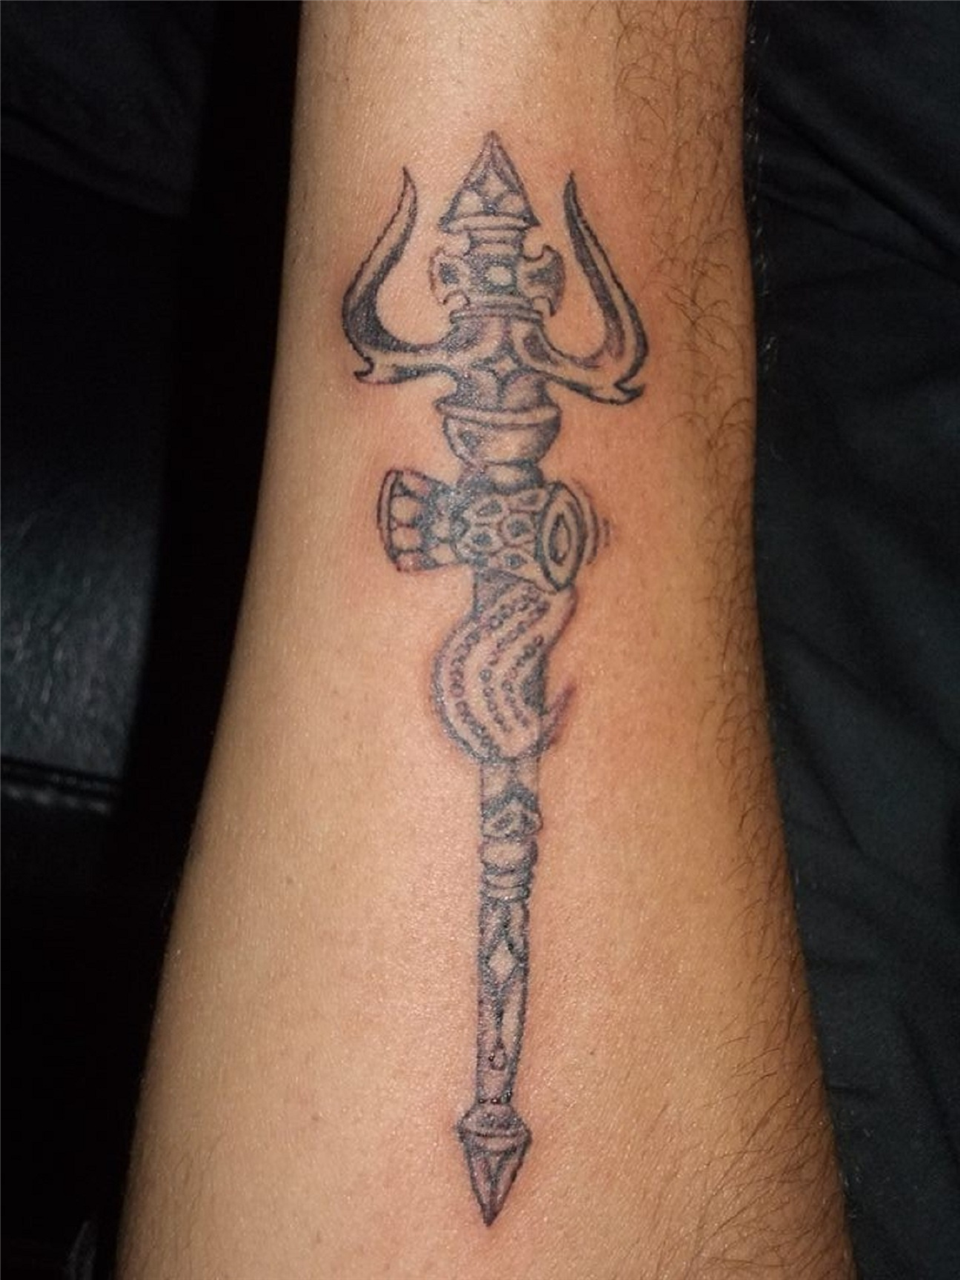 Rate This Snake and trident Tattoo 1 to 100  Trident tattoo Snake tattoo  design Trishul tattoo designs